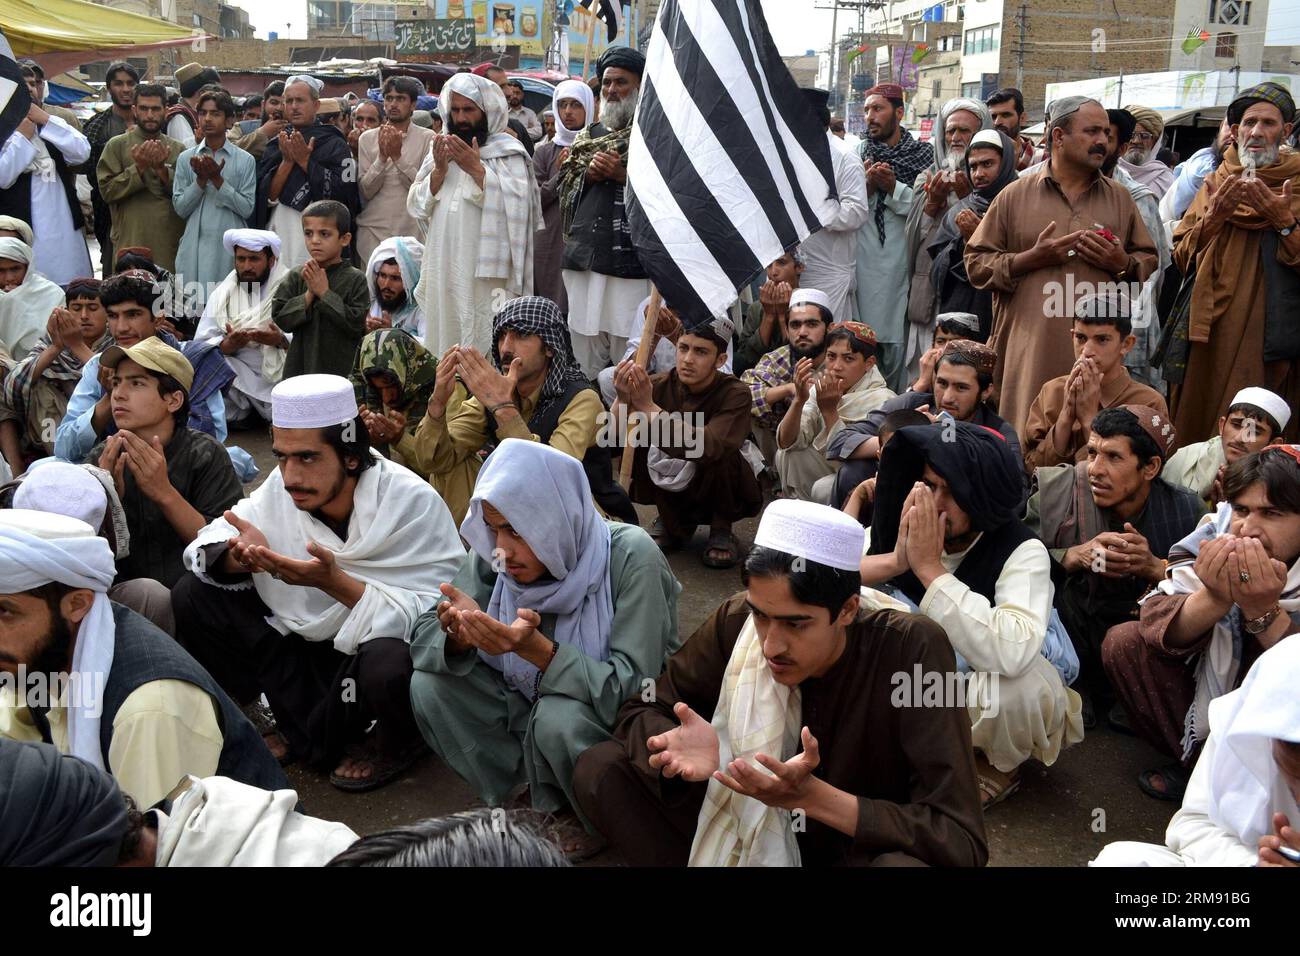 Pakistani protester pray during a protest on the third anniversary of the death of slain Al-Qaeda leader Osama bin Laden, in southwest Pakistan s Quetta on May 2, 2014. Osama bin Laden was killed by U.S. military force on May 2, 2011, in a fortress-like compound on the outskirts of Pakistani city of Abbottabad. (Xinhua/Asad) (WORLD SECTION) PAKISTAN-QUETTA-BIN LADEN-PROTEST PUBLICATIONxNOTxINxCHN   Pakistani  Pray during a Protest ON The Third Anniversary of The Death of Slain Al Qaeda Leader Osama am shop in Southwest Pakistan S Quetta ON May 2 2014 Osama am shop what KILLED by U S Military F Stock Photo